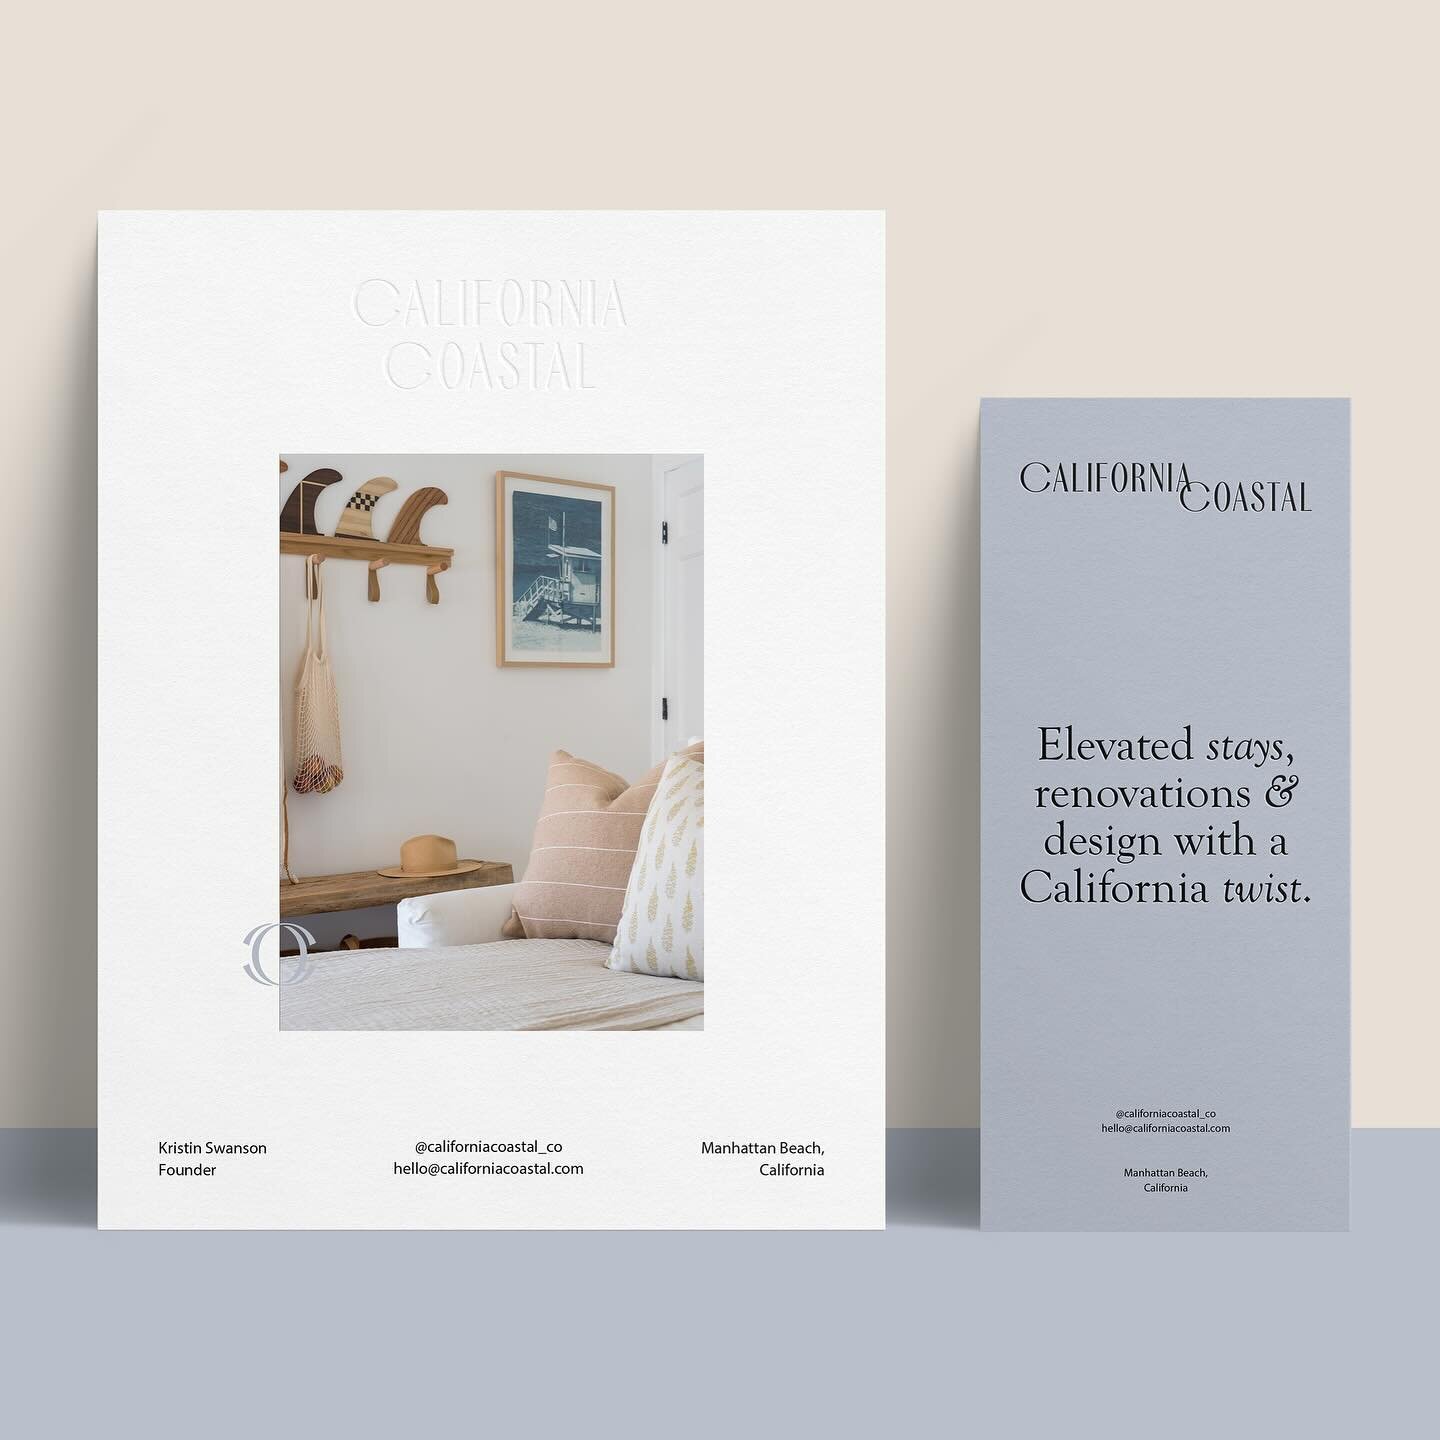 Recently completed a project for California Coastal. Their mission to blend California&rsquo;s unique beauty into homes truly inspired us.

We brought this vision to life through their brand and website, infusing a casual coastal yet modern feel that